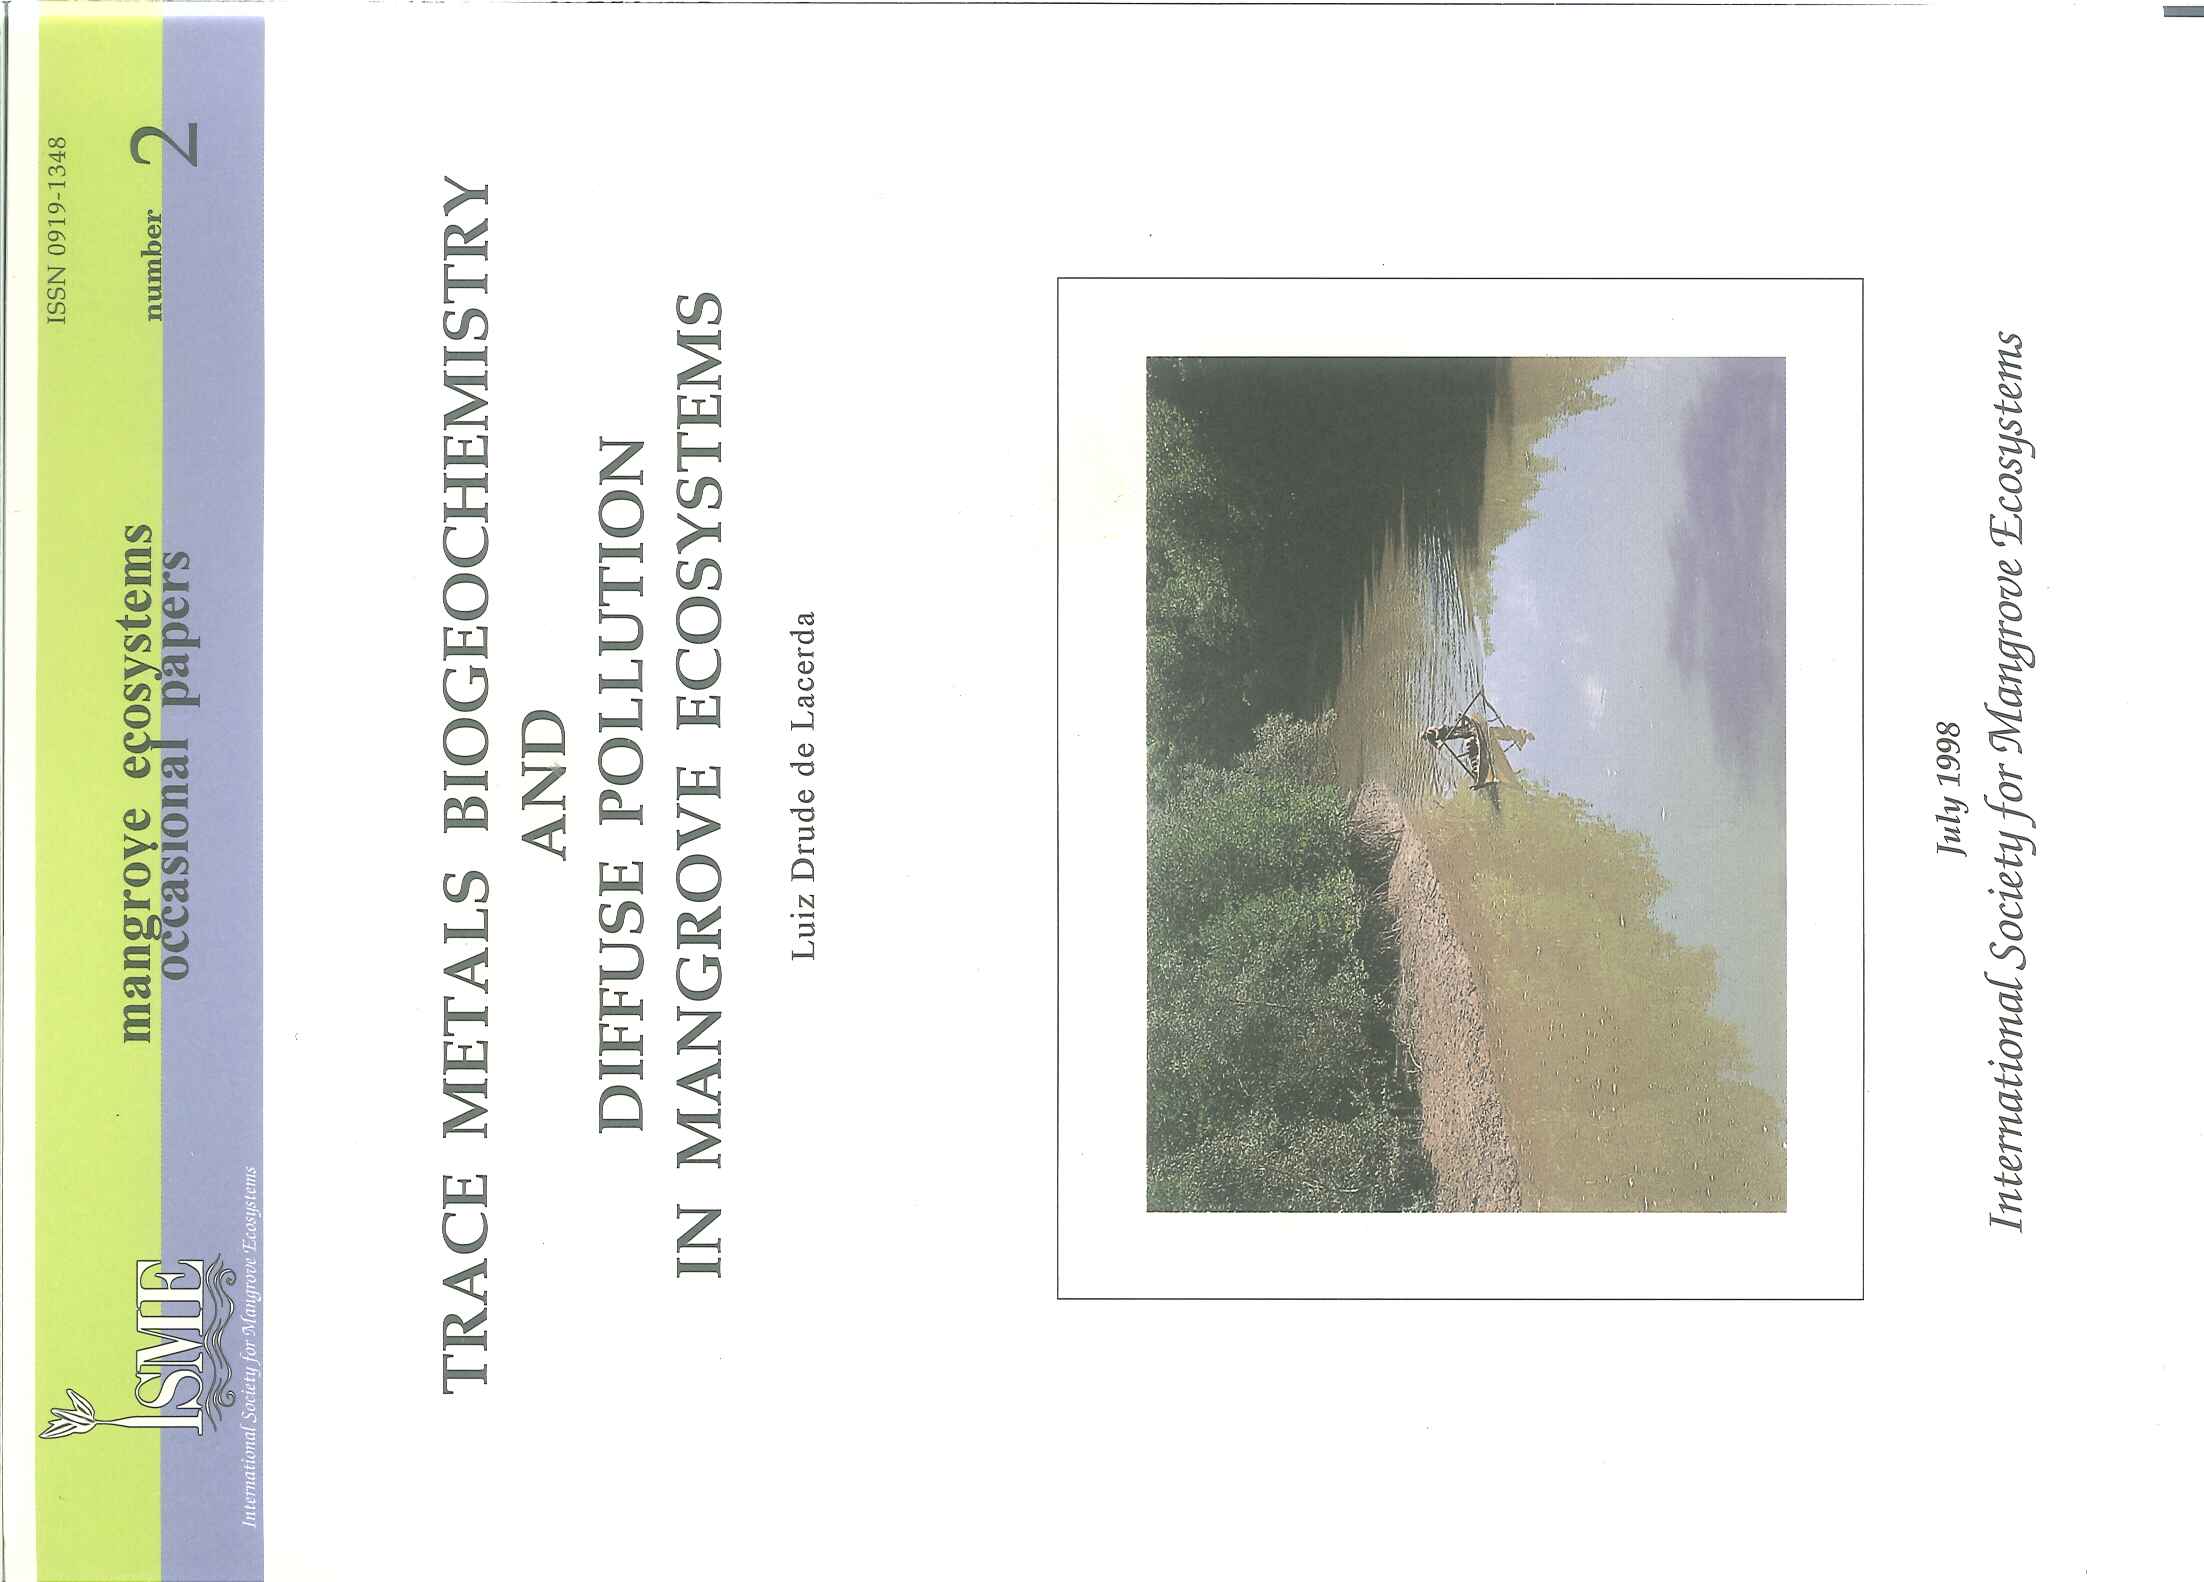 ISME Mangrove Ecosystems Occasional Papers No.2 - Trace Metals Biogeochemistry and Diffuse Pollution in Mangrove Ecosystems